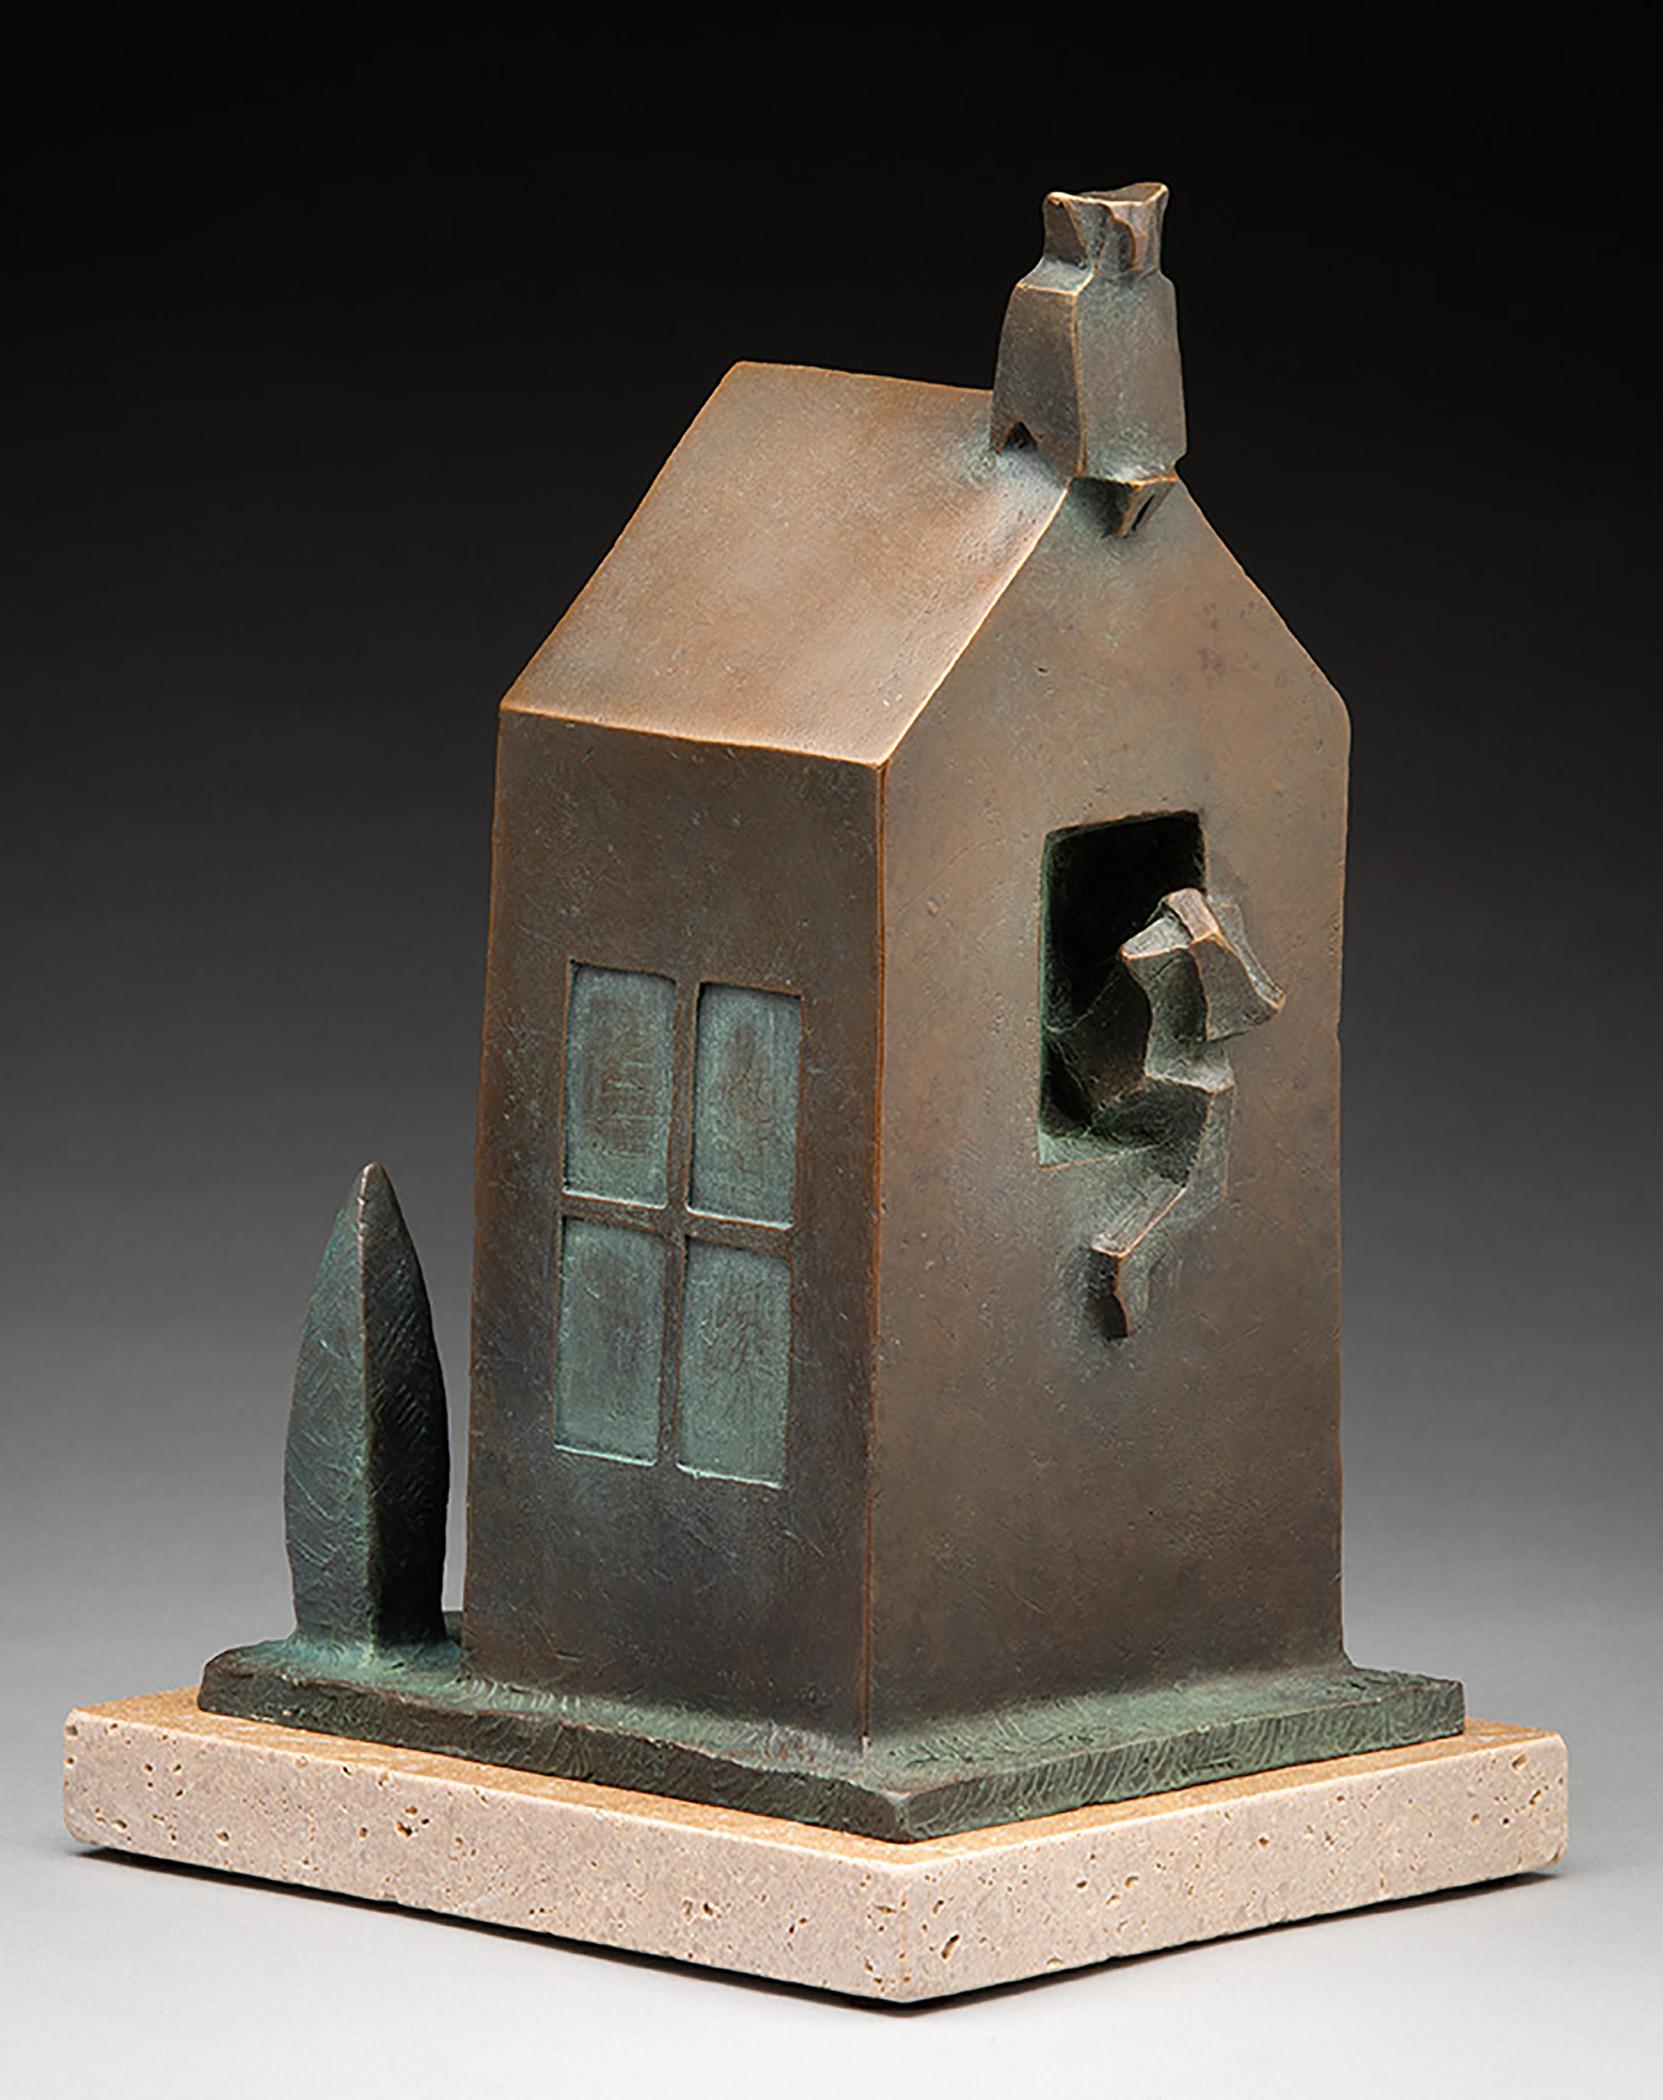 Wayne Salge Abstract Sculpture - "Cabin Fever 2" Bronze cast mini sculpture of a house with owl, Cubism